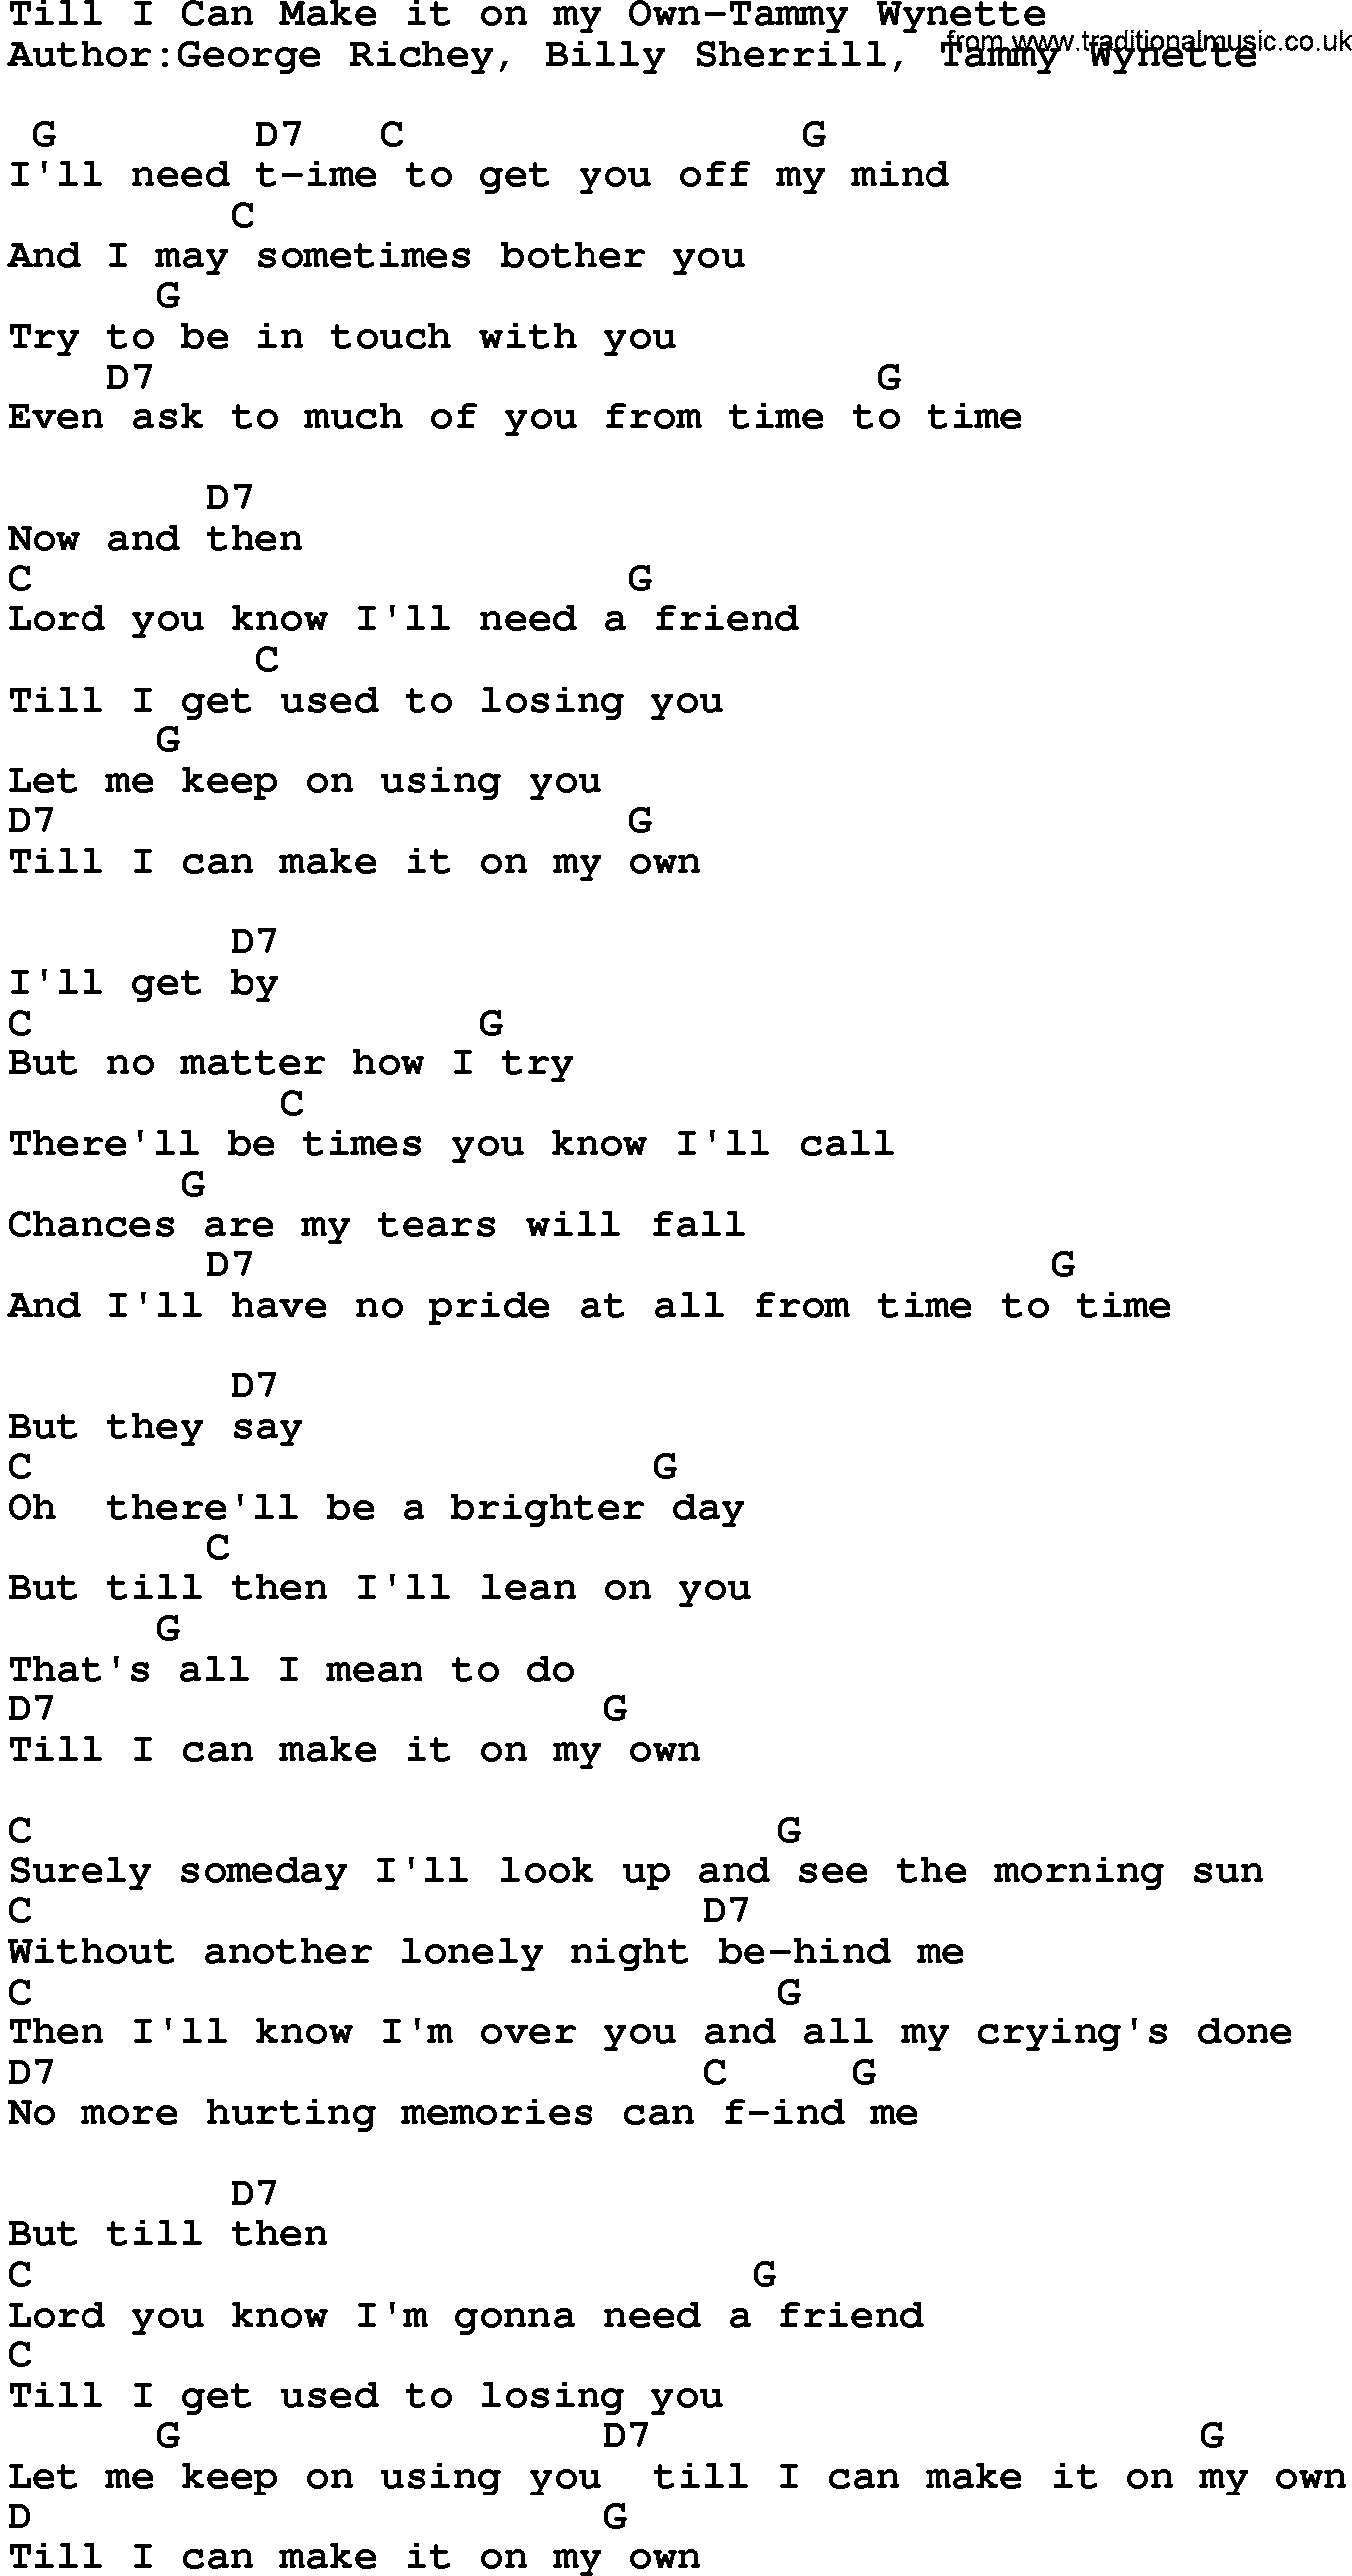 Country music song: Till I Can Make It On My Own-Tammy Wynette lyrics and chords